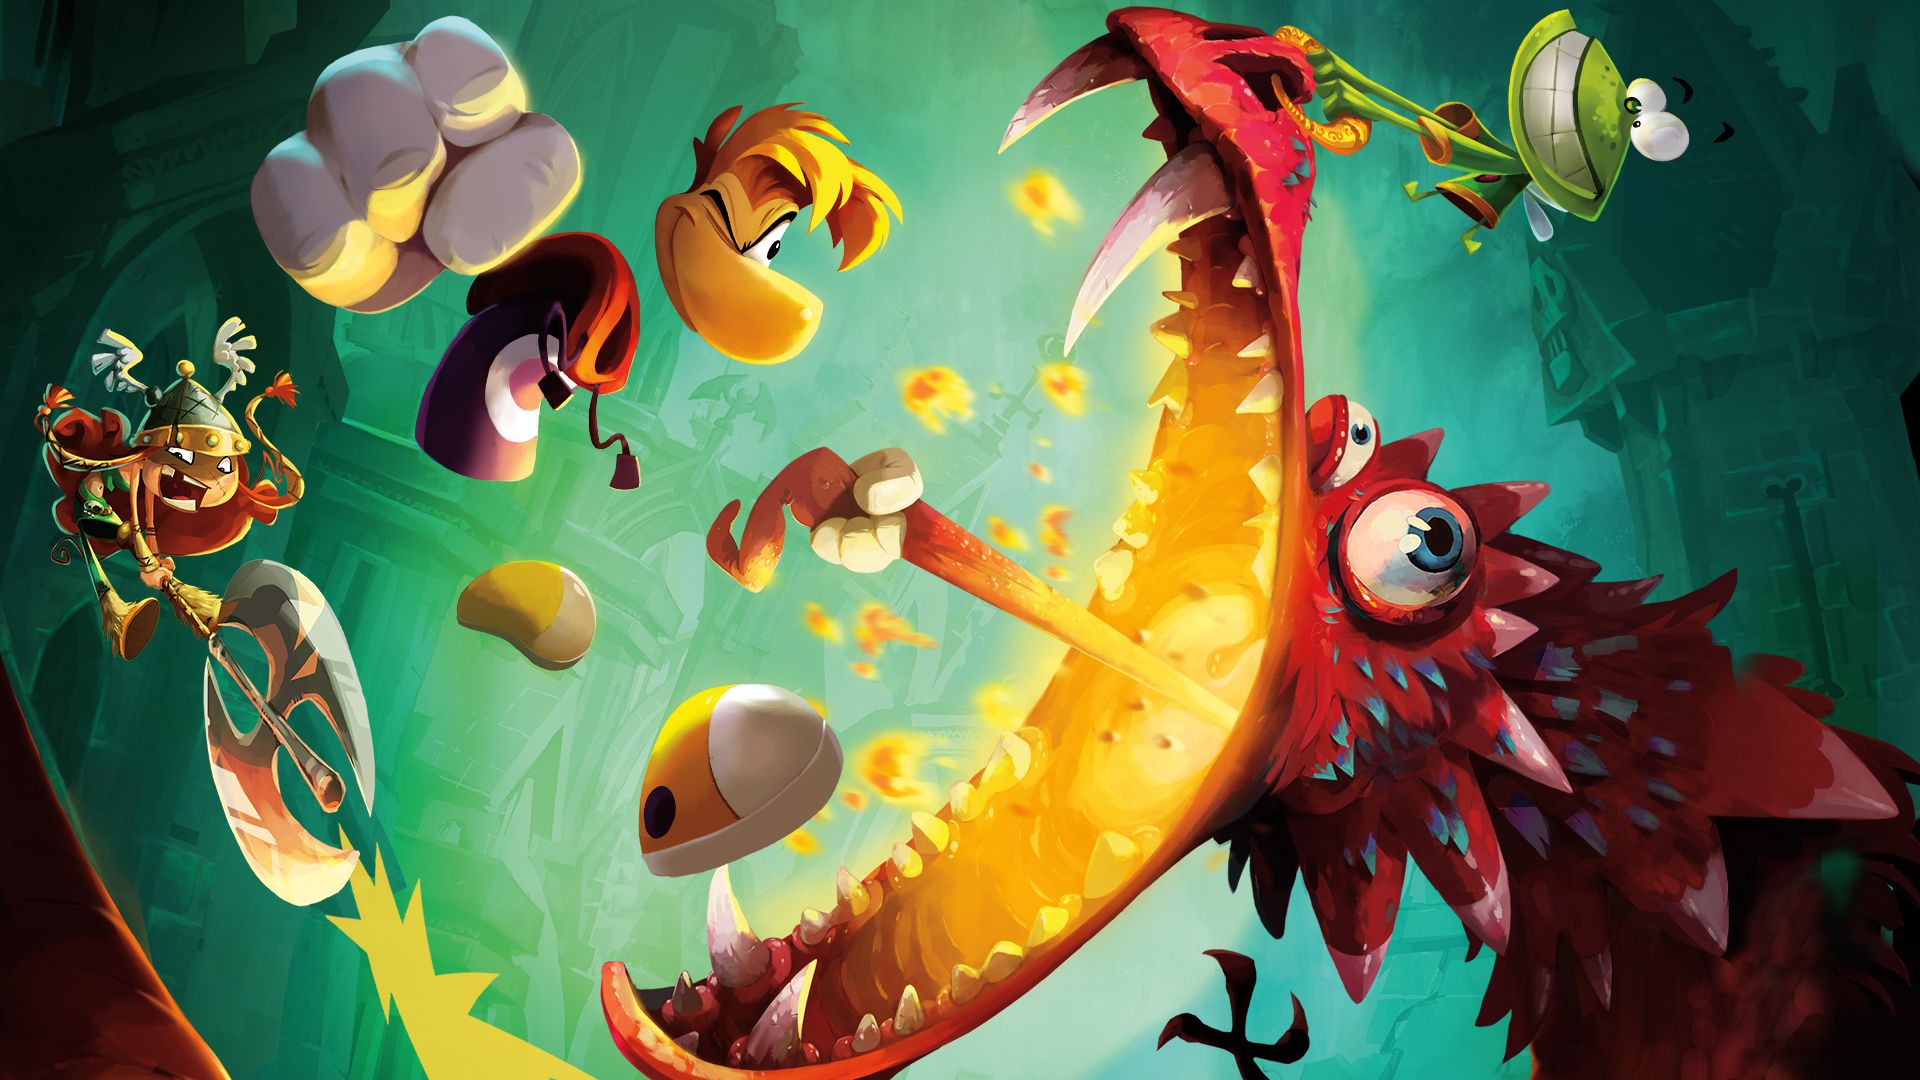 Rayman Legends Definitive Edition Xbox 360 Wallpaper - Ps Plus May 2018 Free Games , HD Wallpaper & Backgrounds